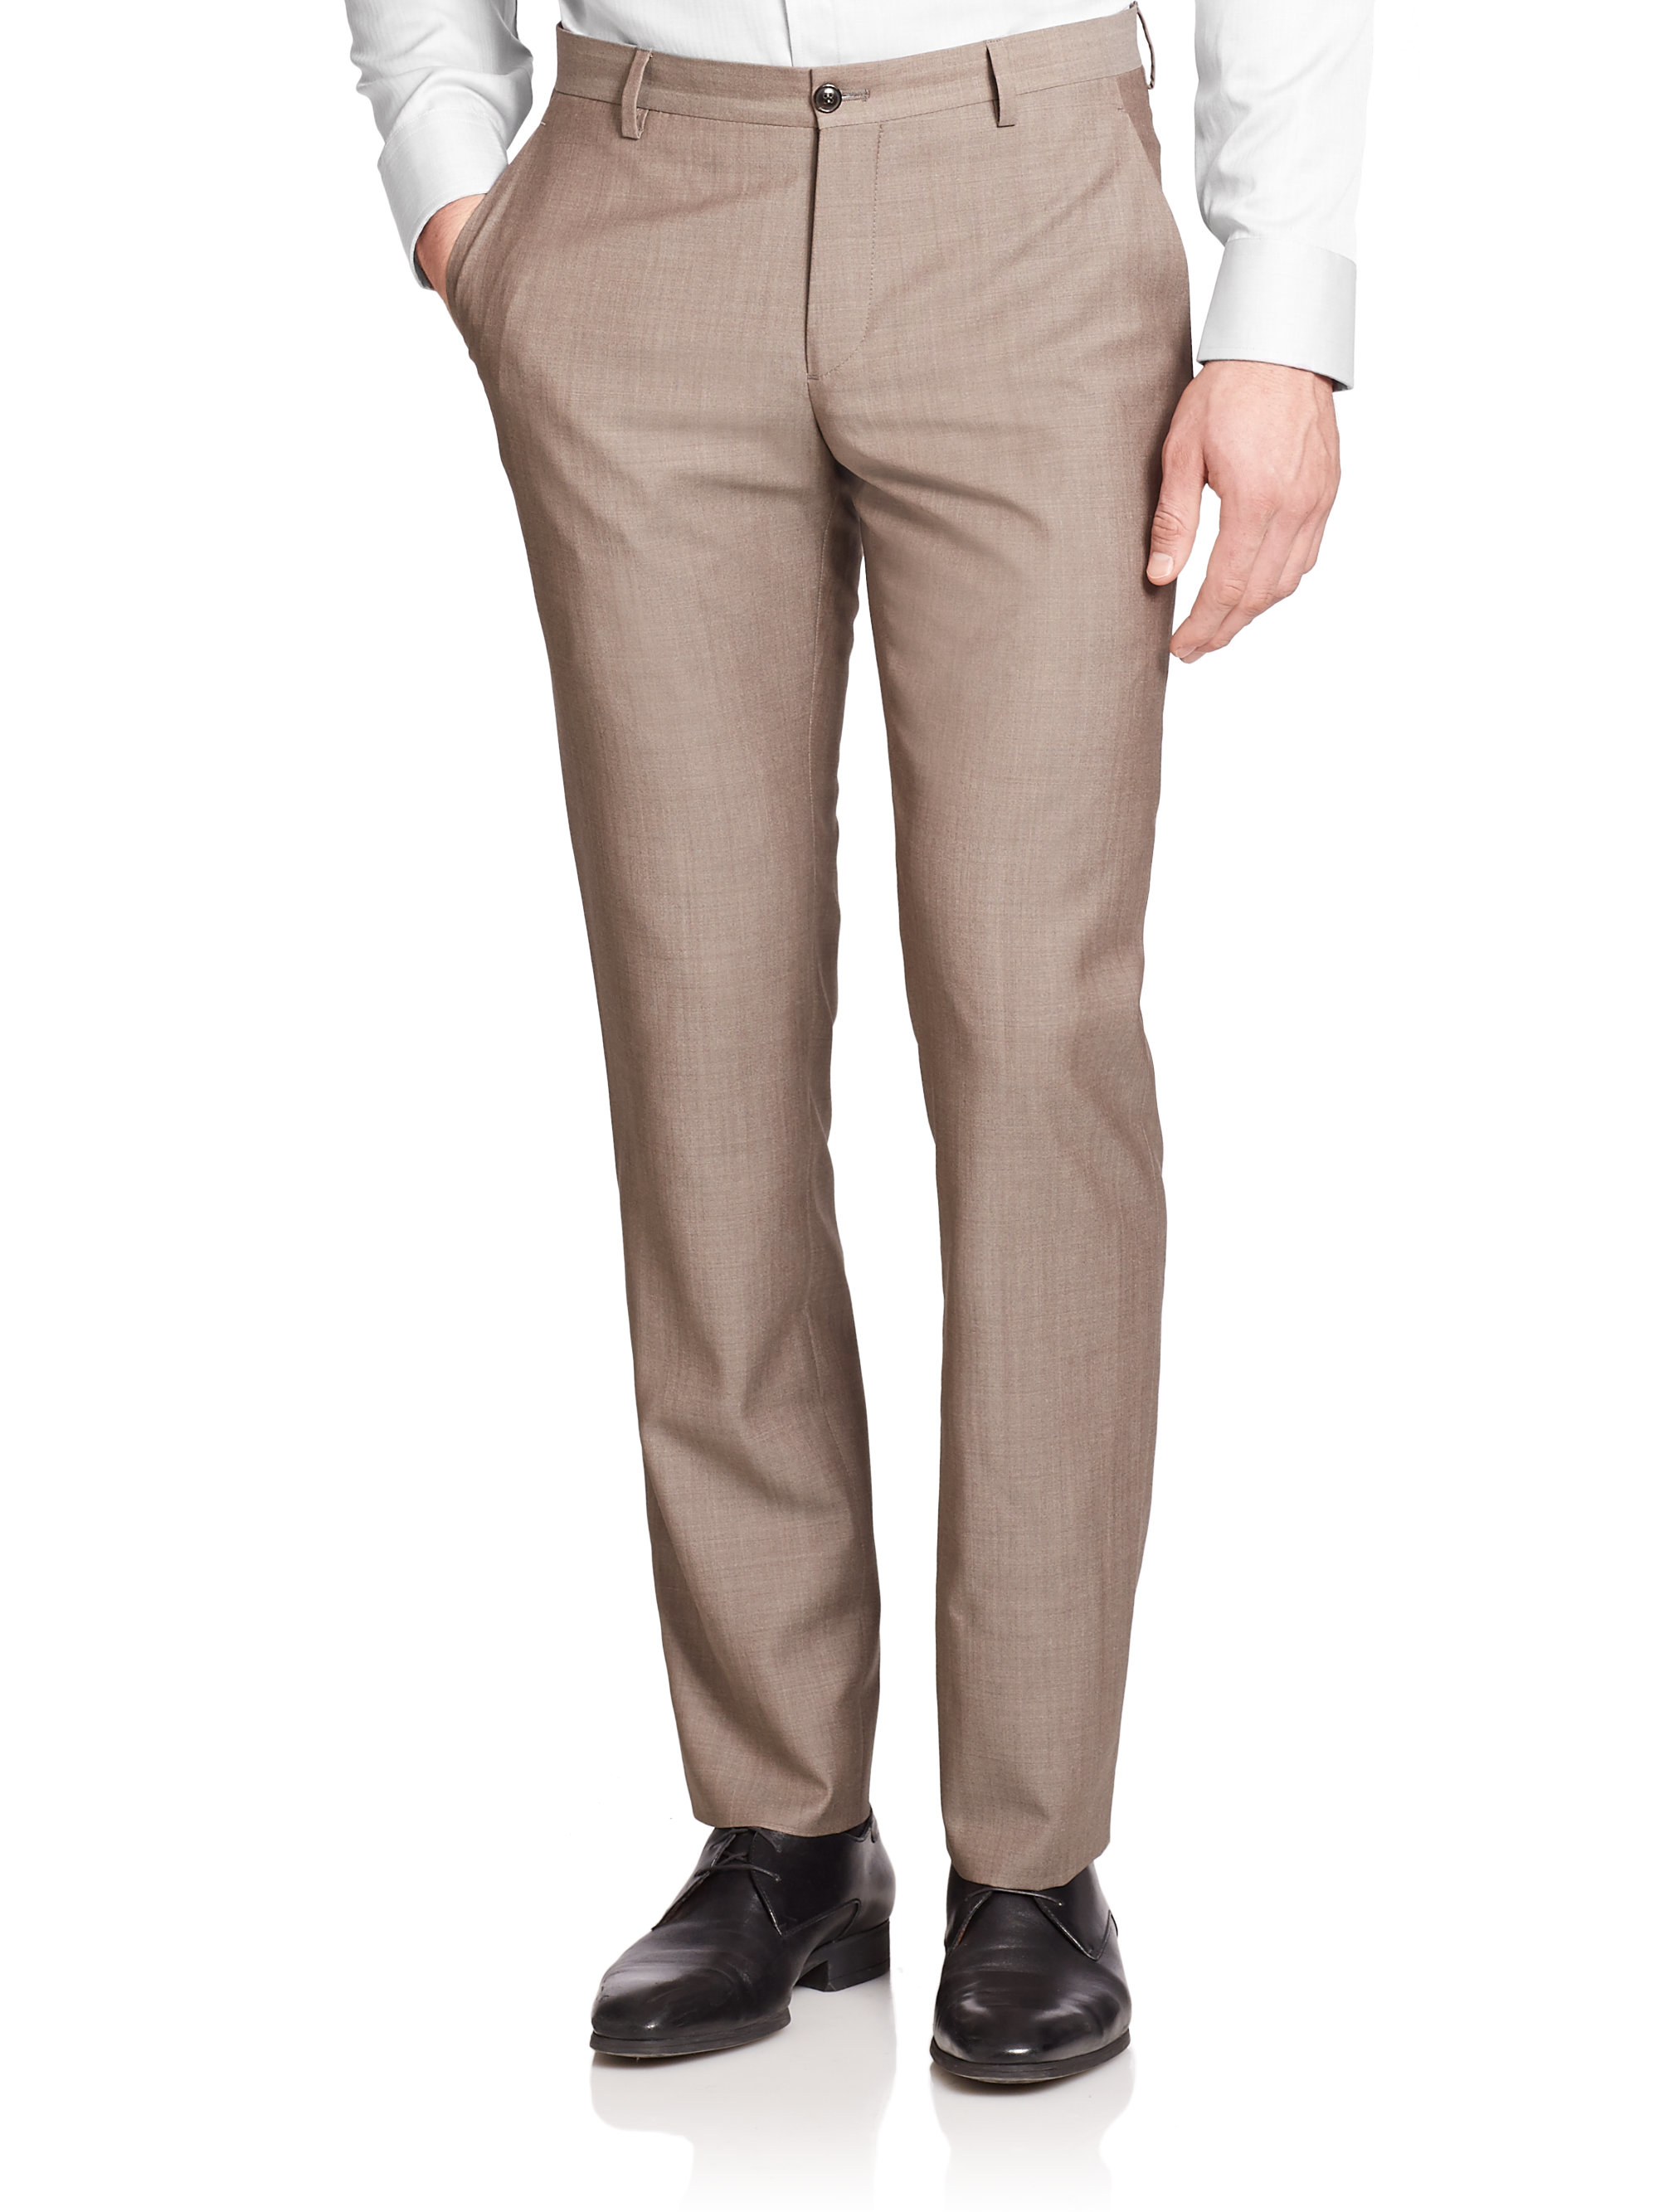 Lyst - Giorgio Armani Textured Wool Dress Pants in Brown for Men